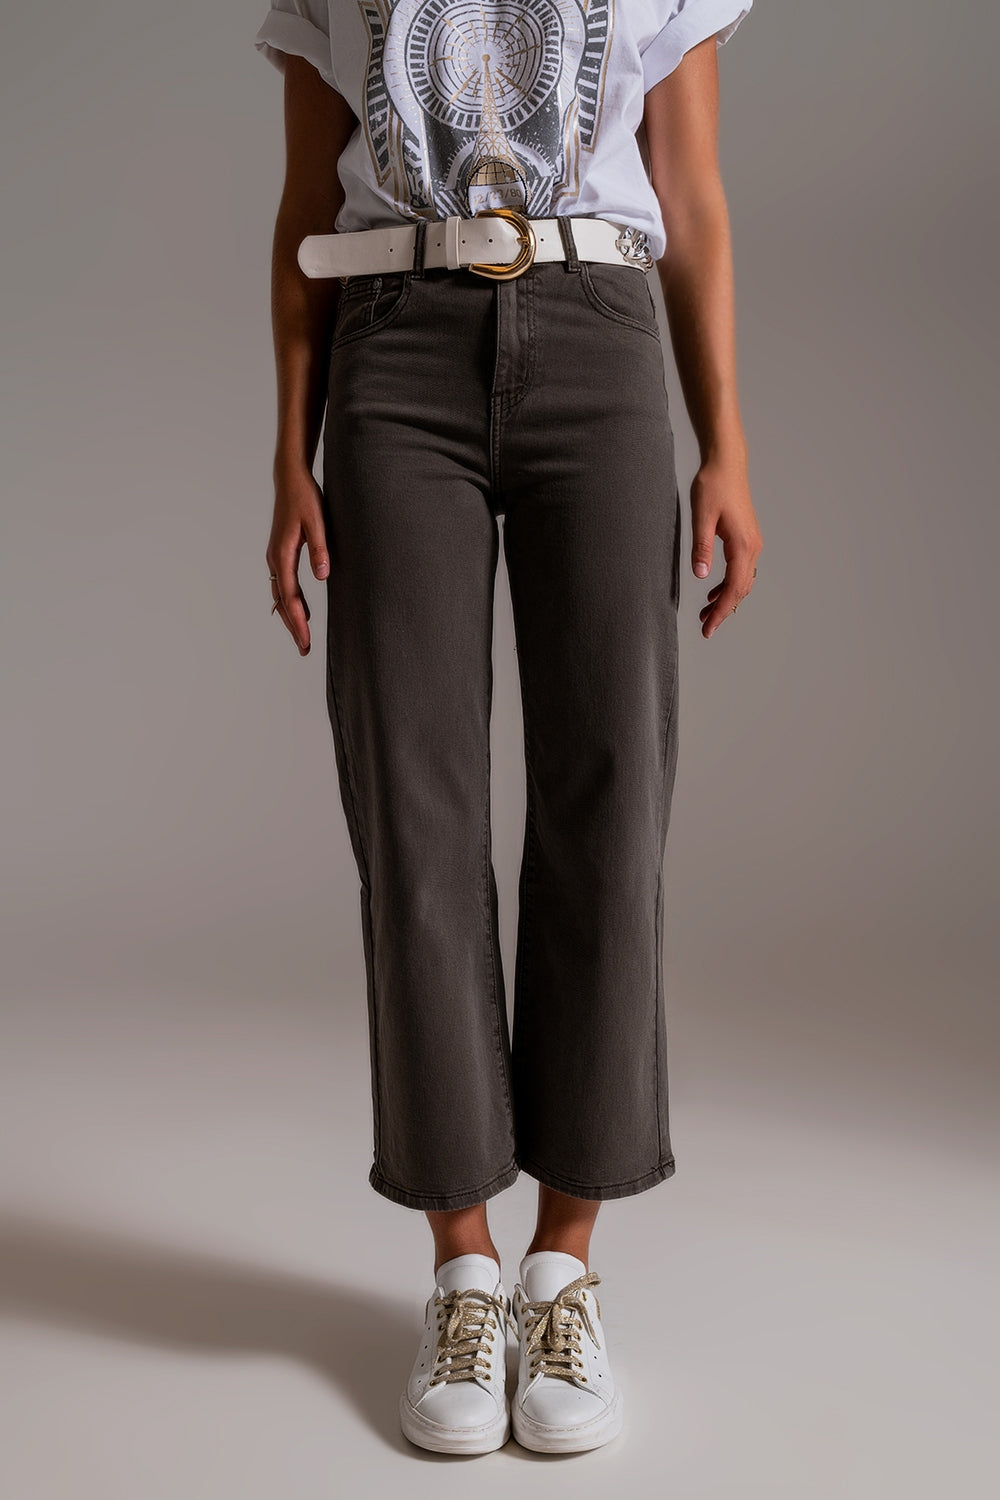 Q2 Cropped wide leg jeans in grey